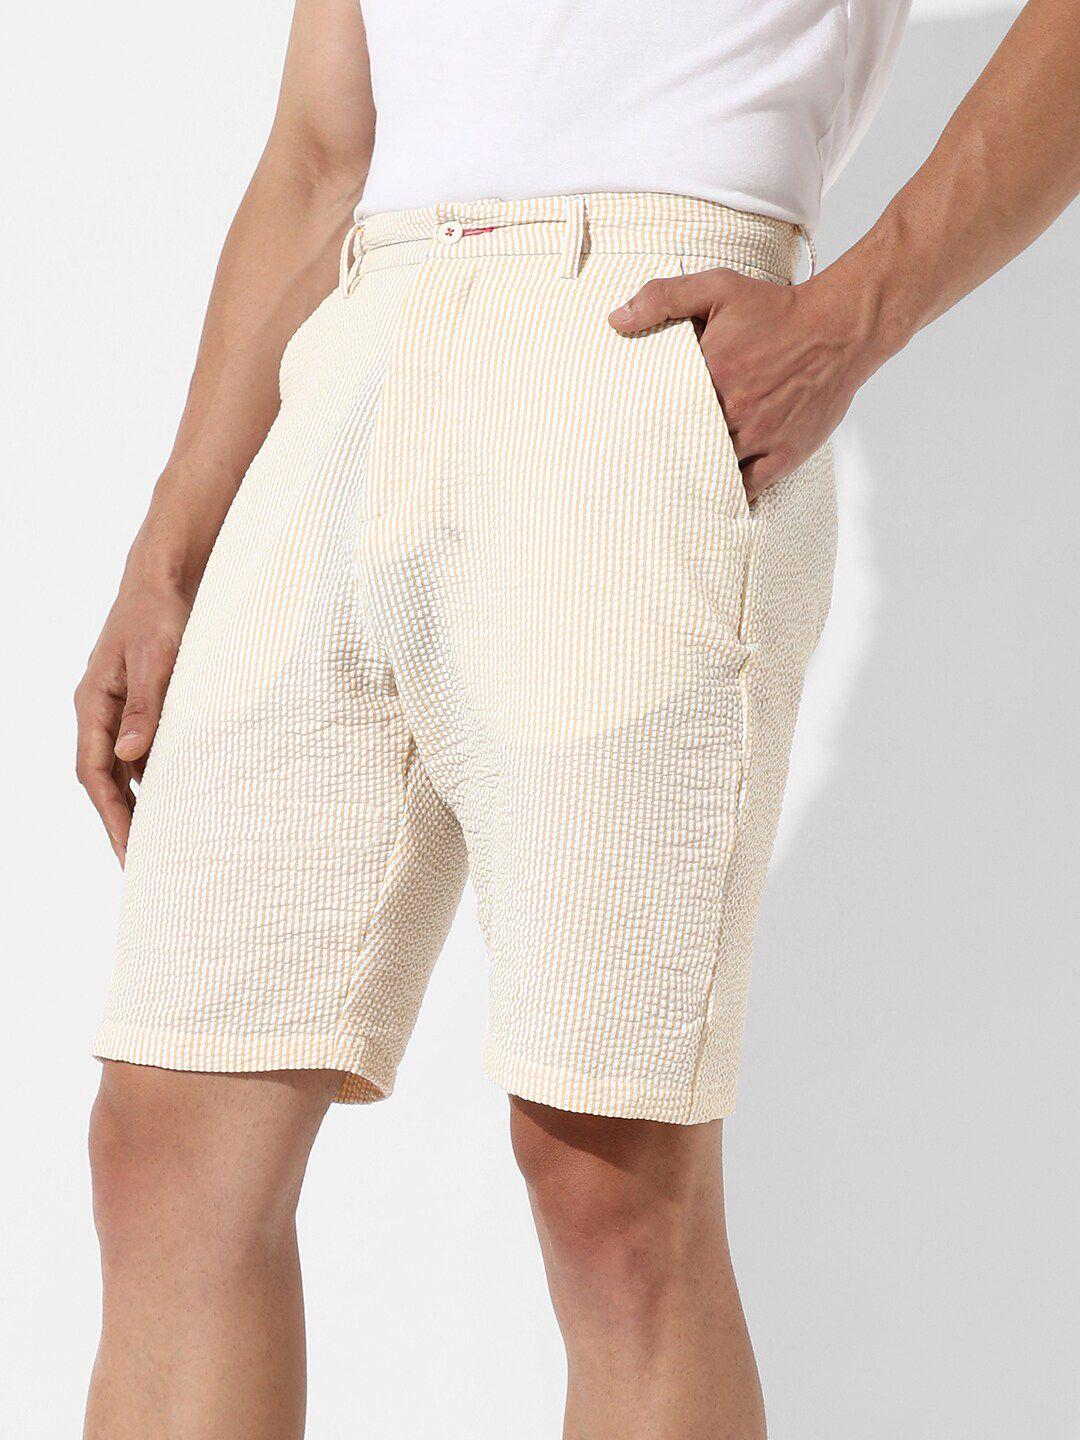 campus-sutra-men-striped-mid-rise-cotton-shorts